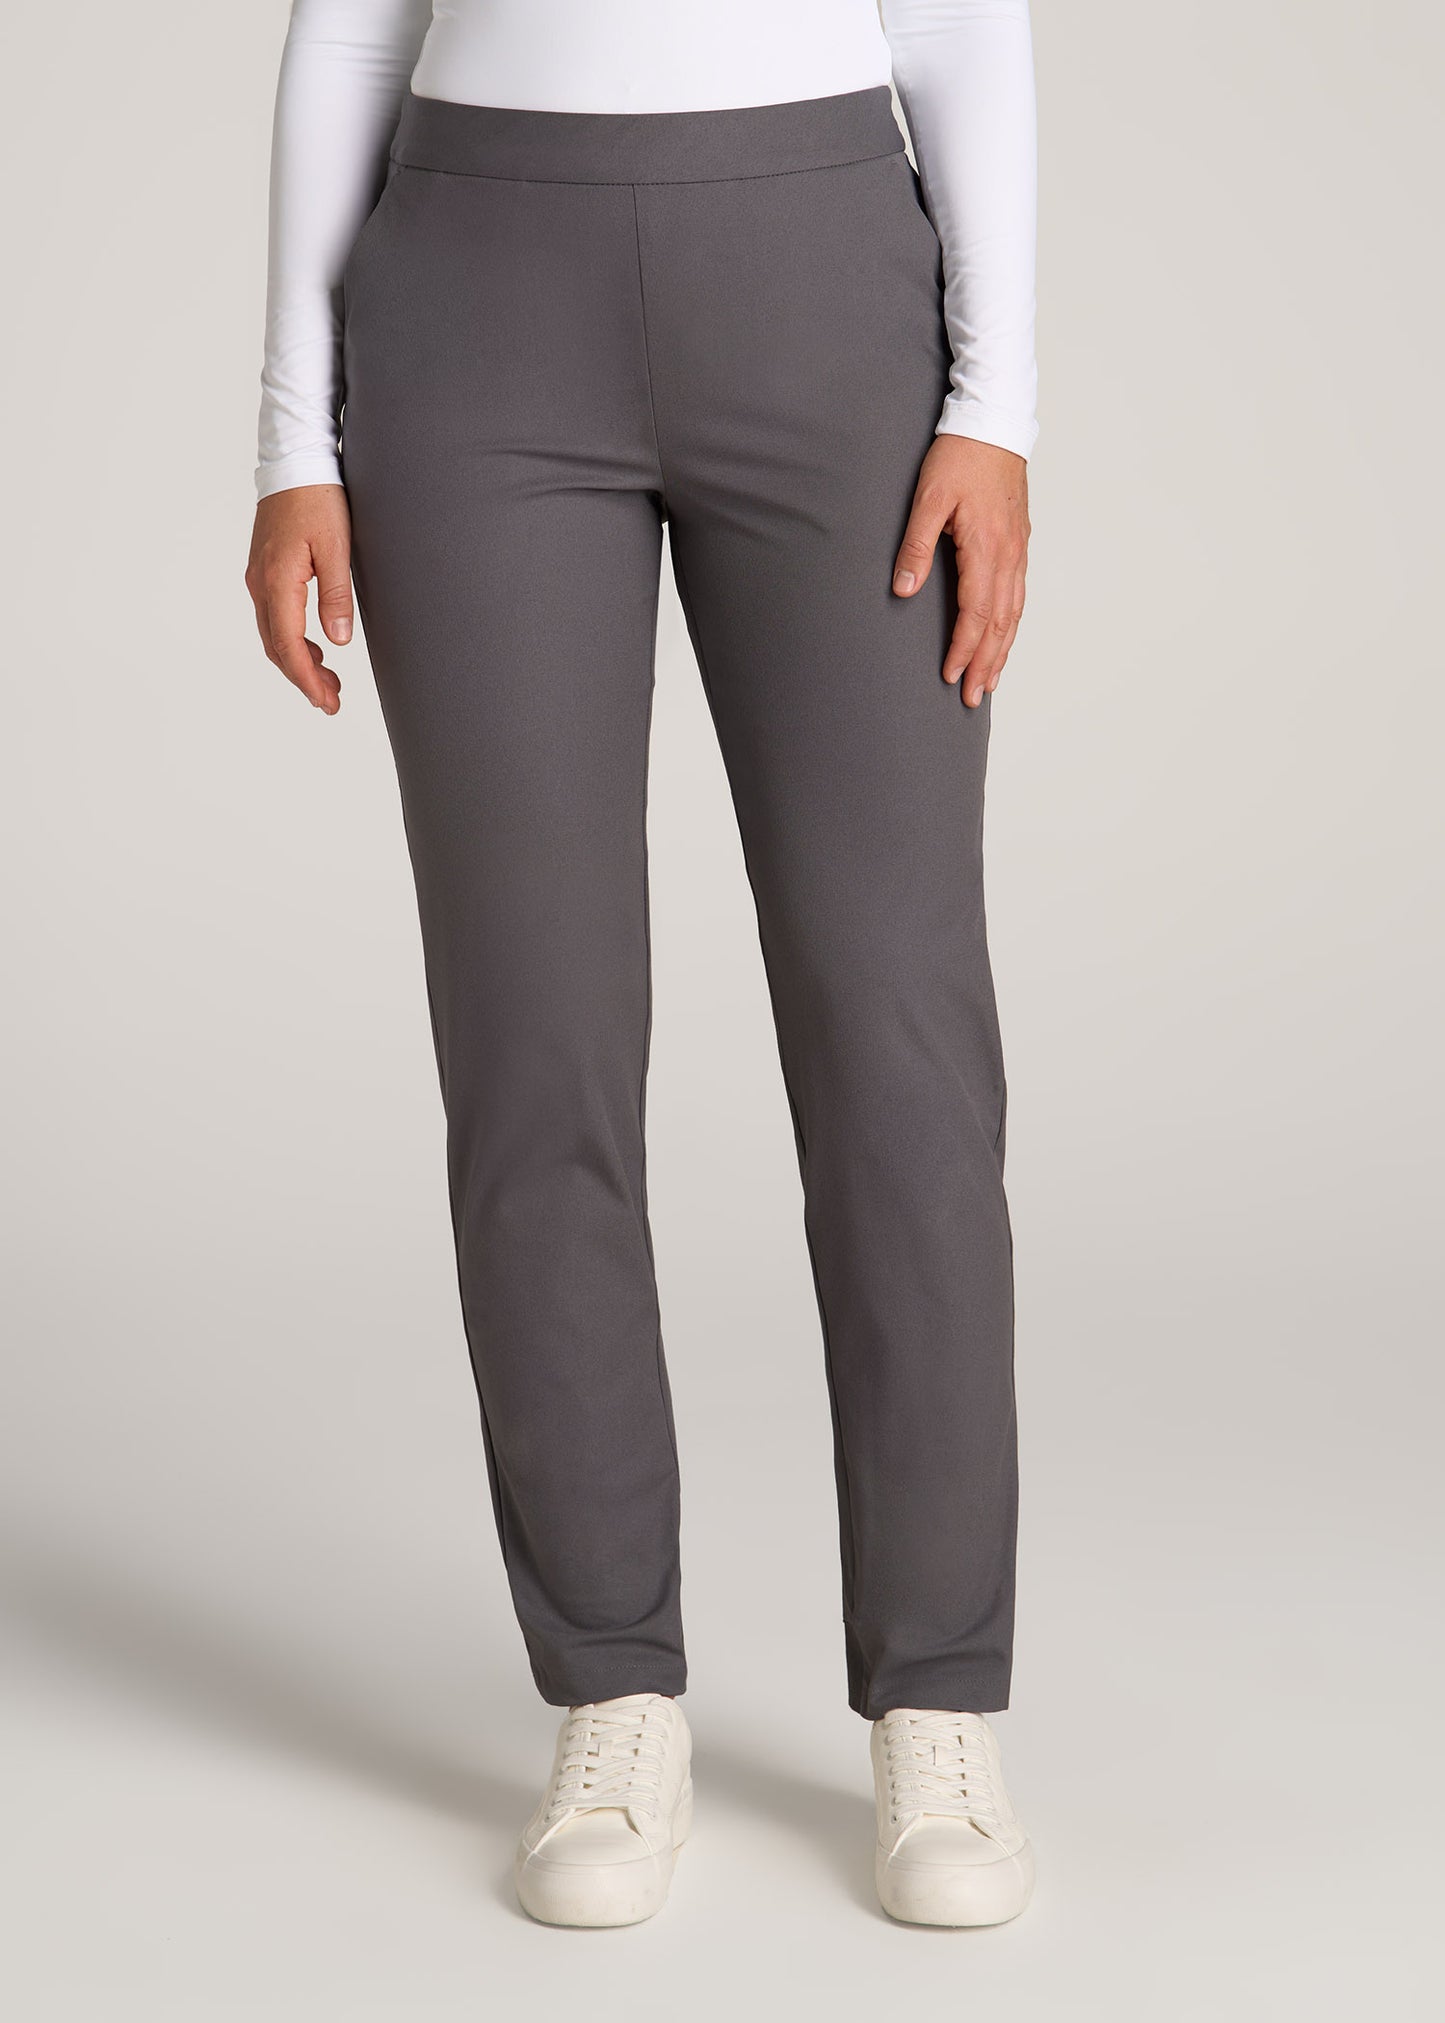 Lands' End Women's Tall Mid Rise Pull On Chino Crop Pants - 10